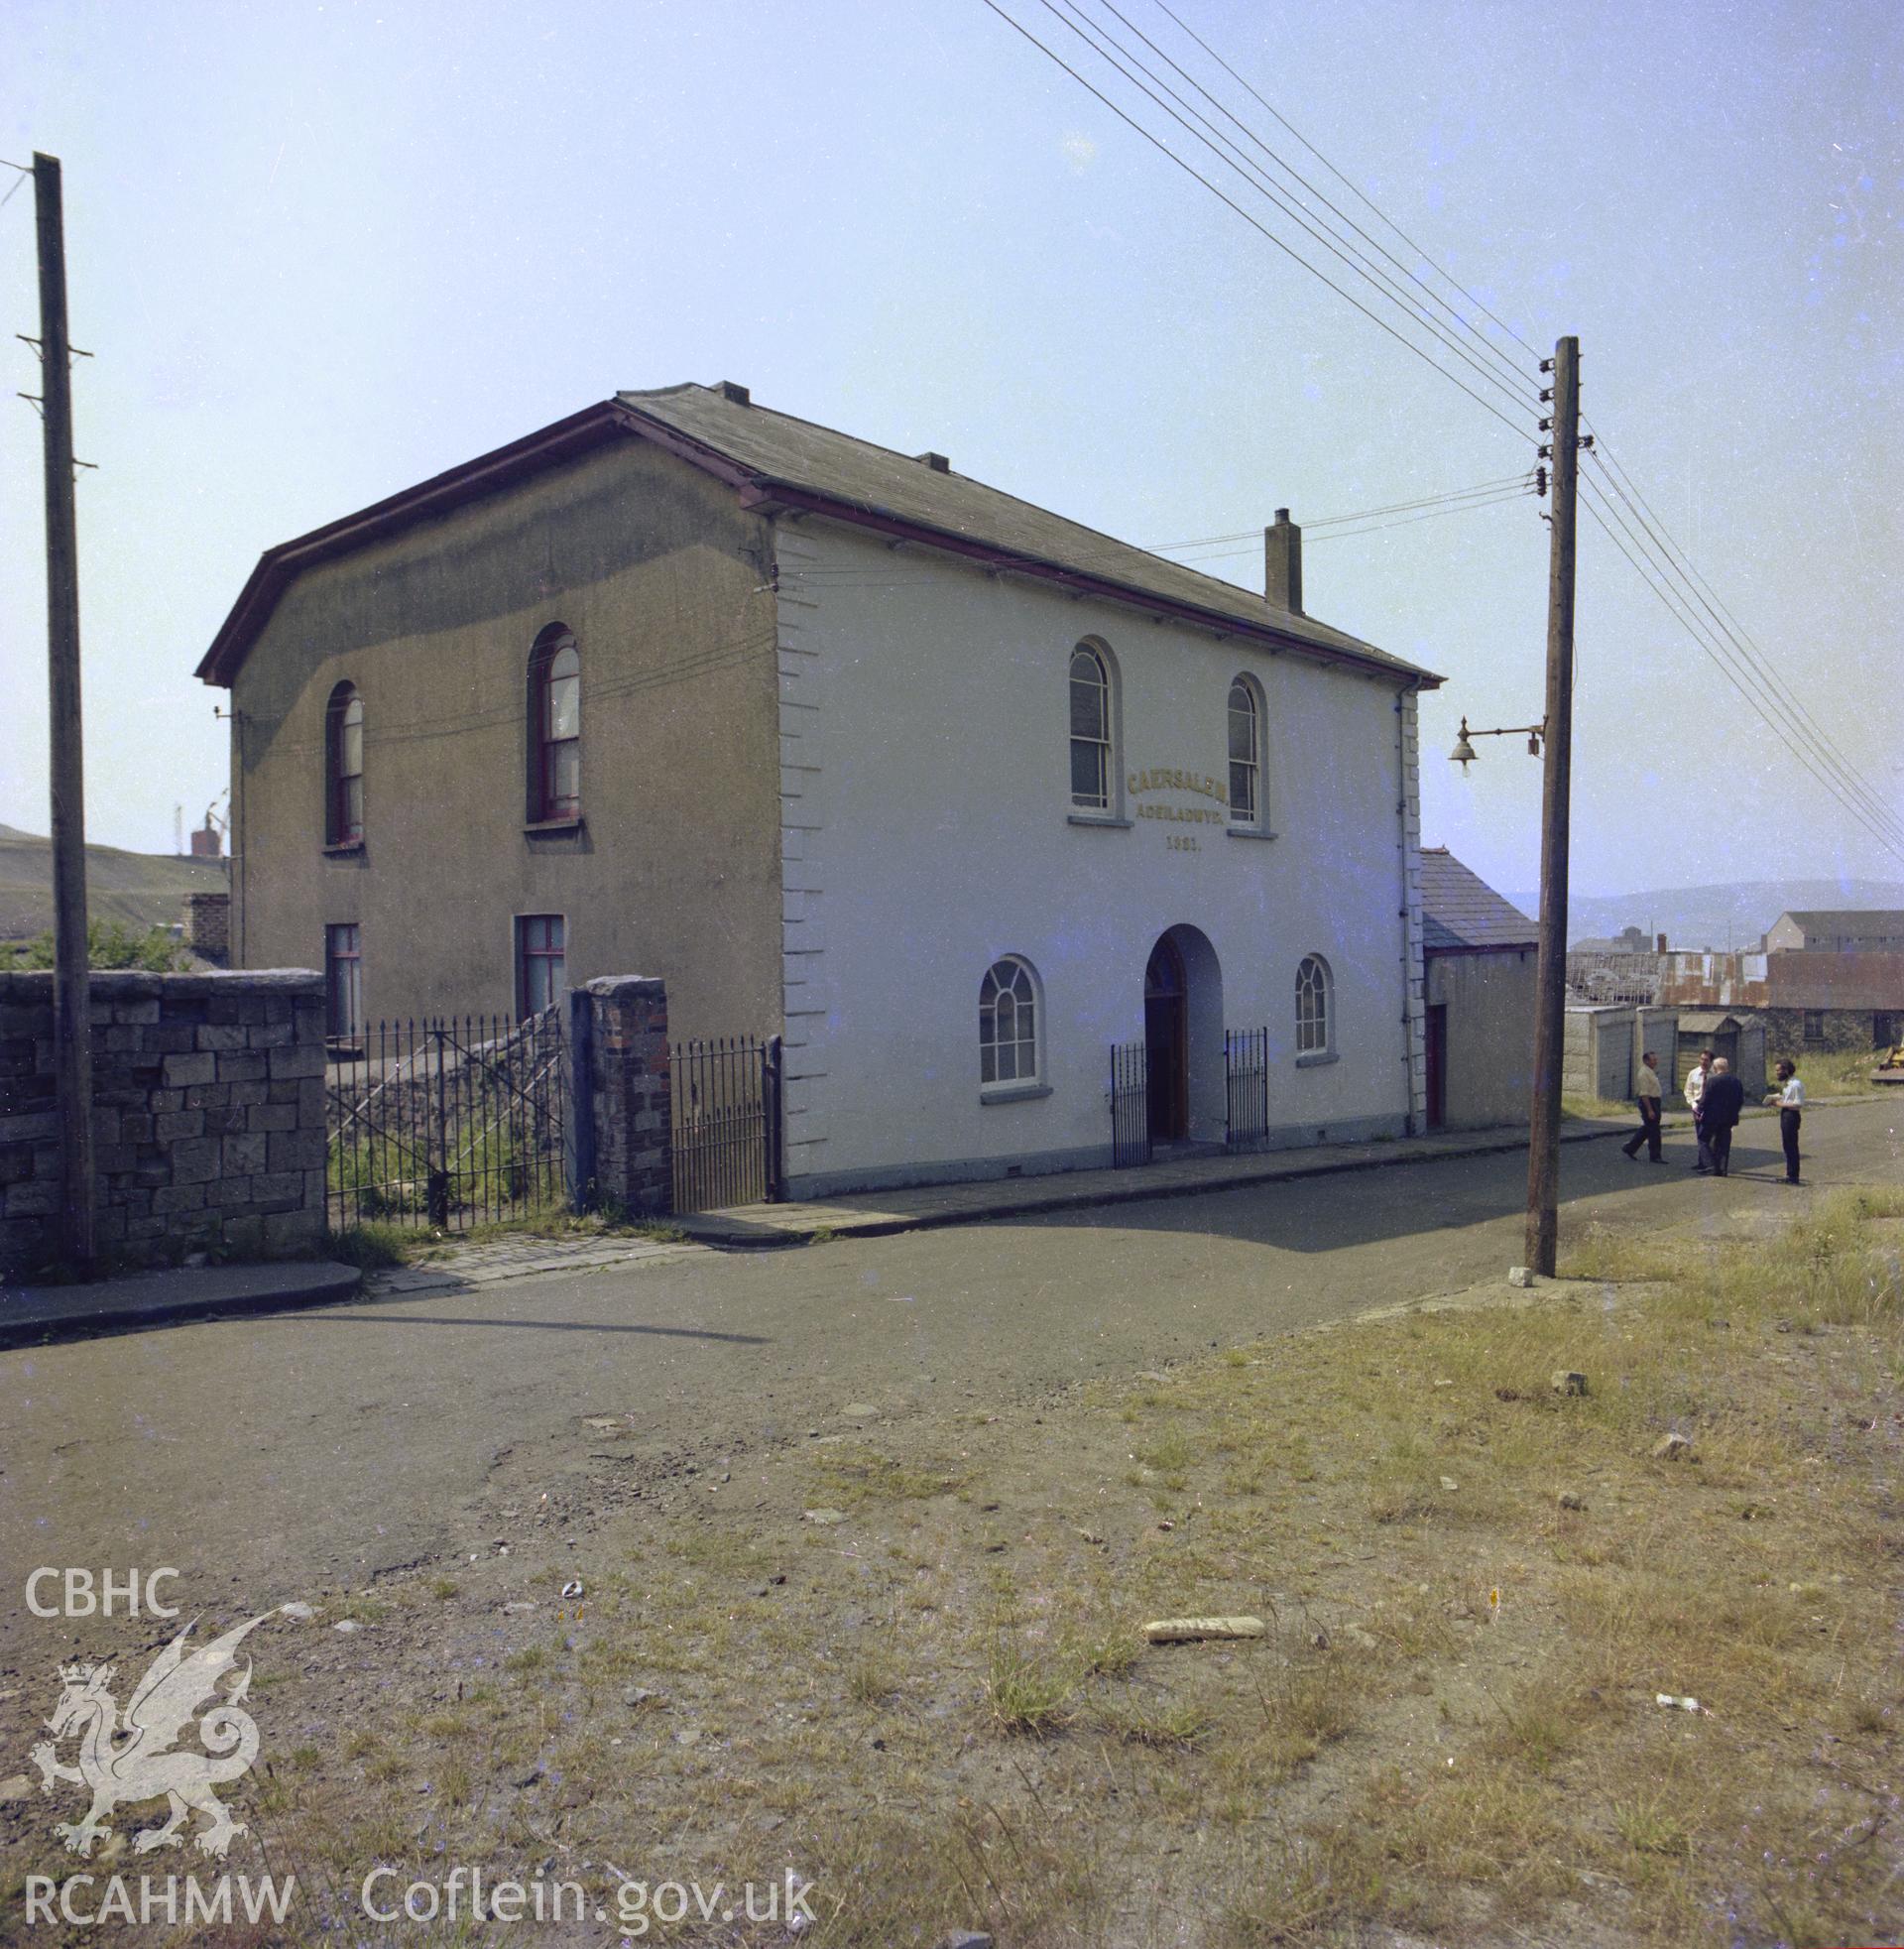 Digital copy of a colour negative showing an exterior view of Caersalem Chapel, taken by RCAHMW.